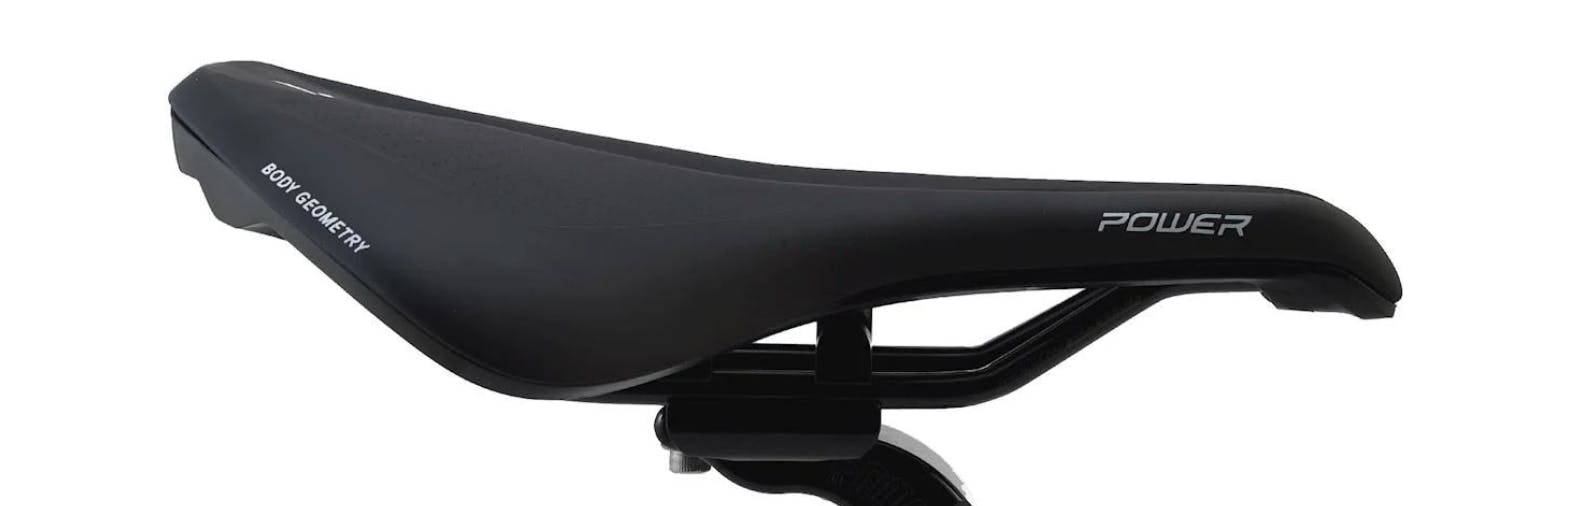 The Specialized Power Expert Saddle.